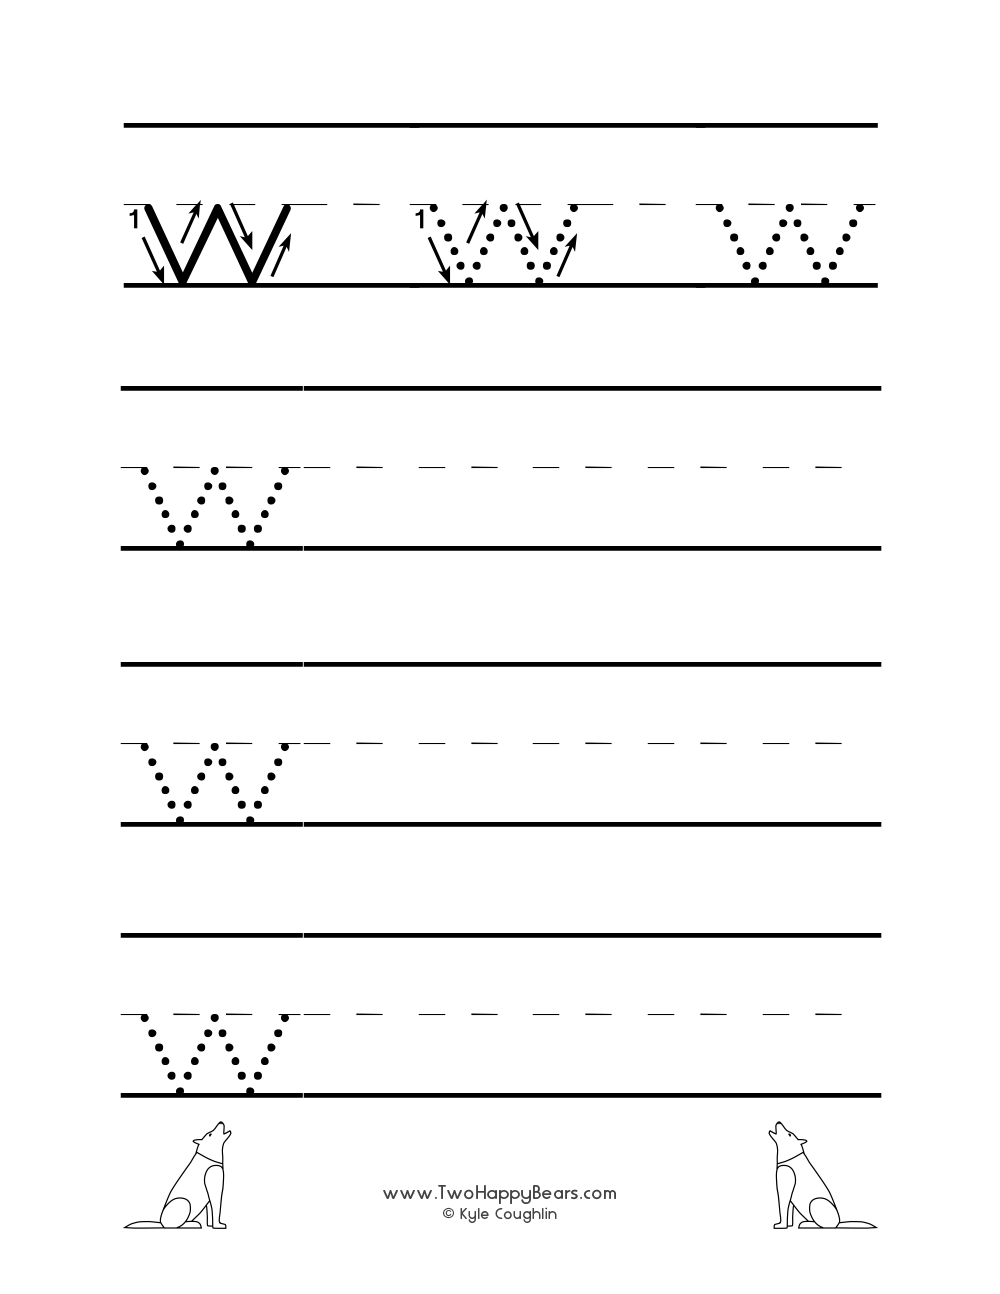 Worksheet for tracing and writing the lowercase letter W, in free printable PDF format.